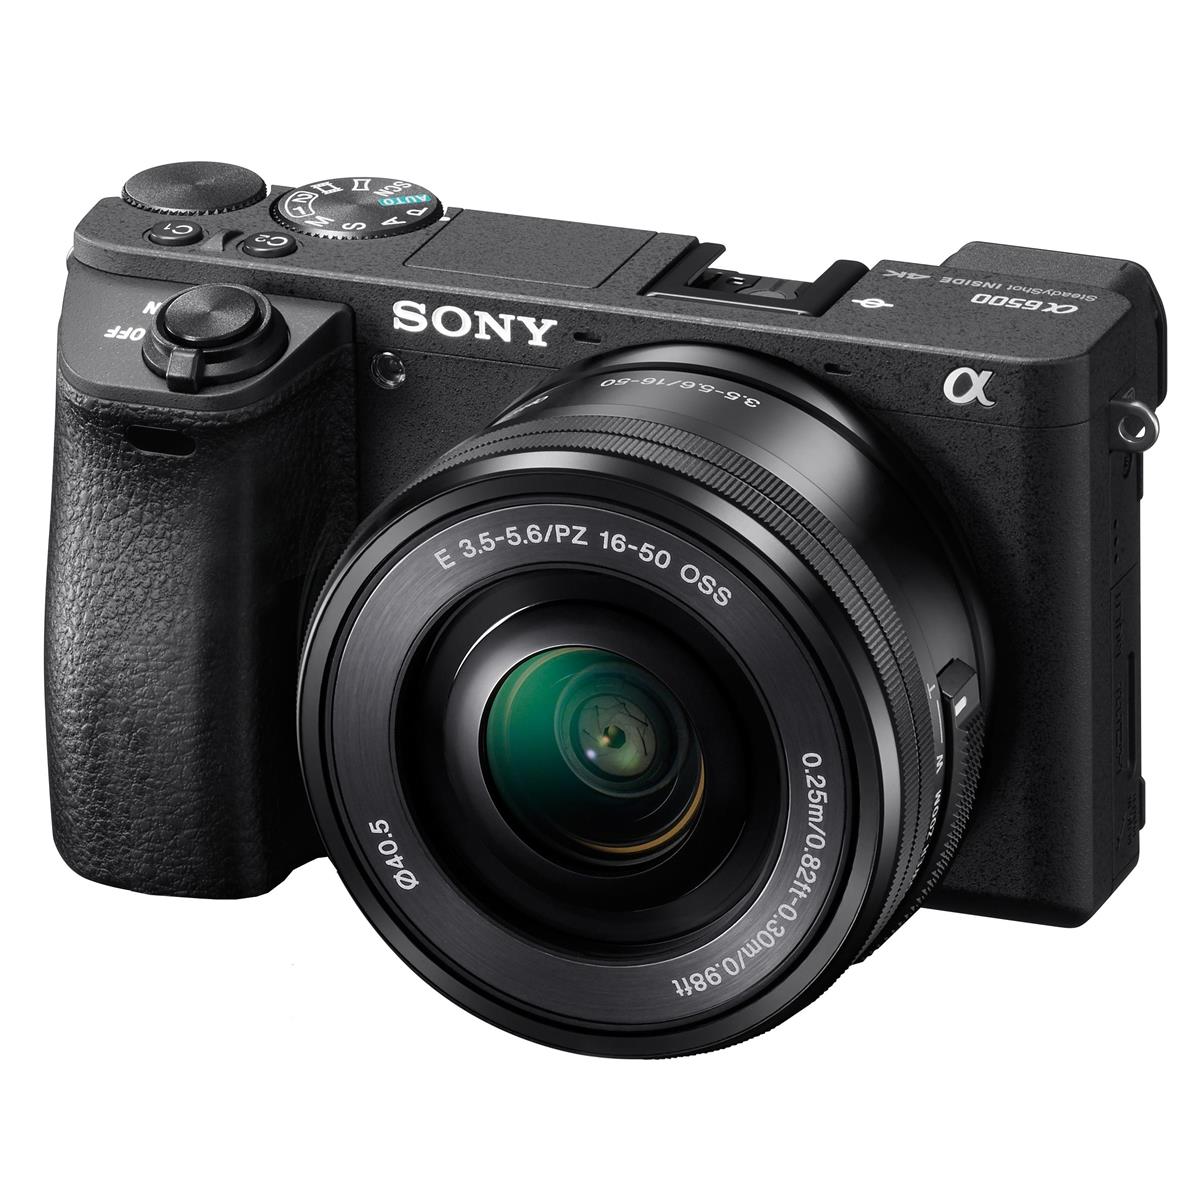 Sony a6500 Mirrorless Digital Camera Kit with 16-50mm Lens